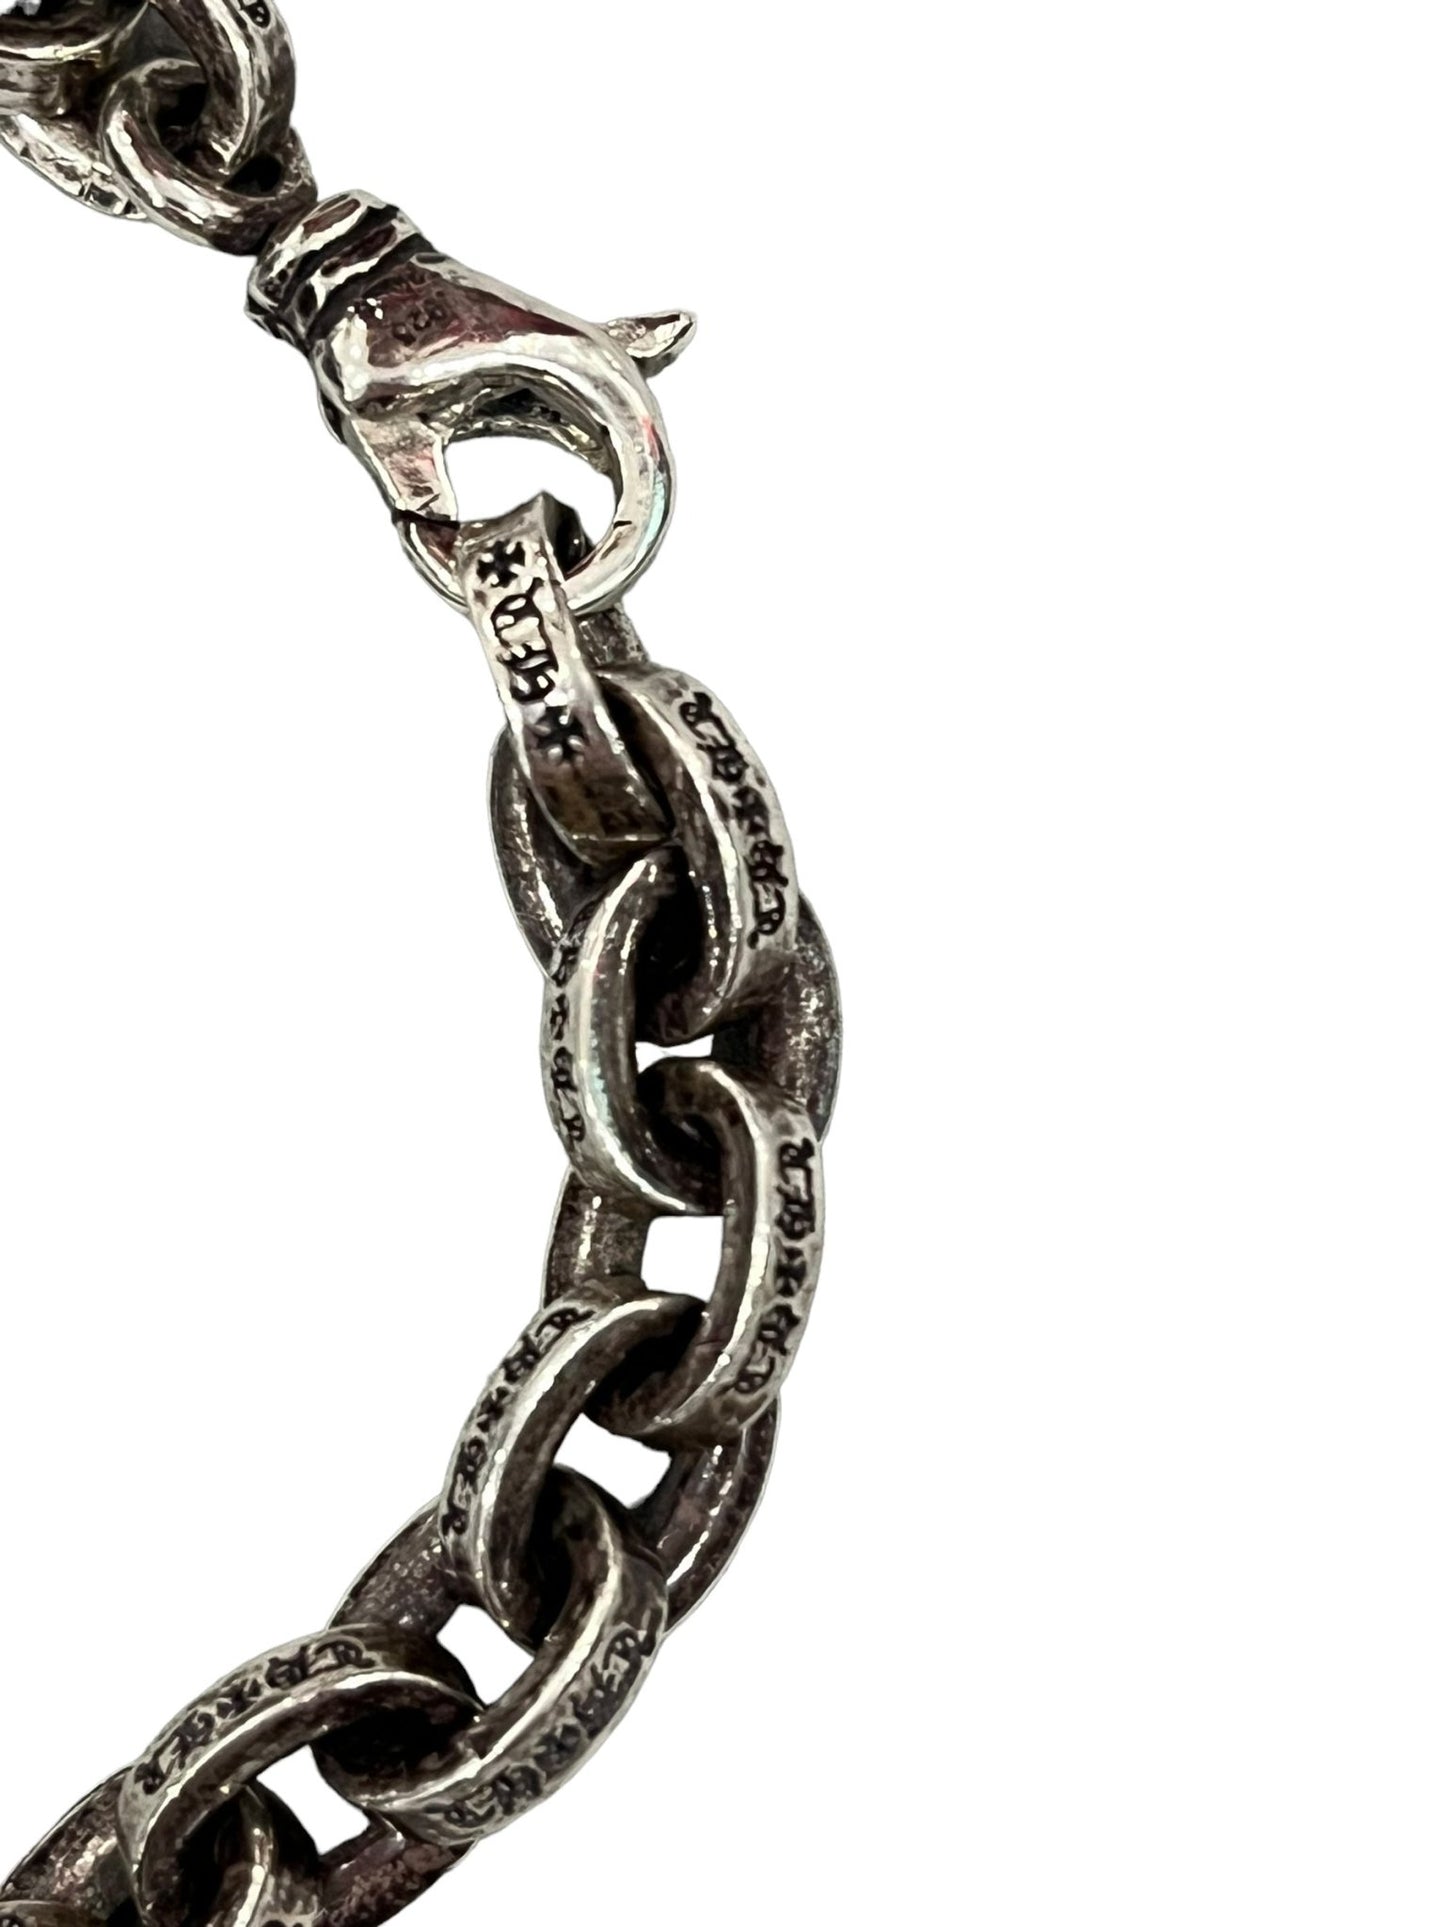 Chrome Hearts Silver Paper Chain Bracelet (8 Inches) - Supra Sneakers